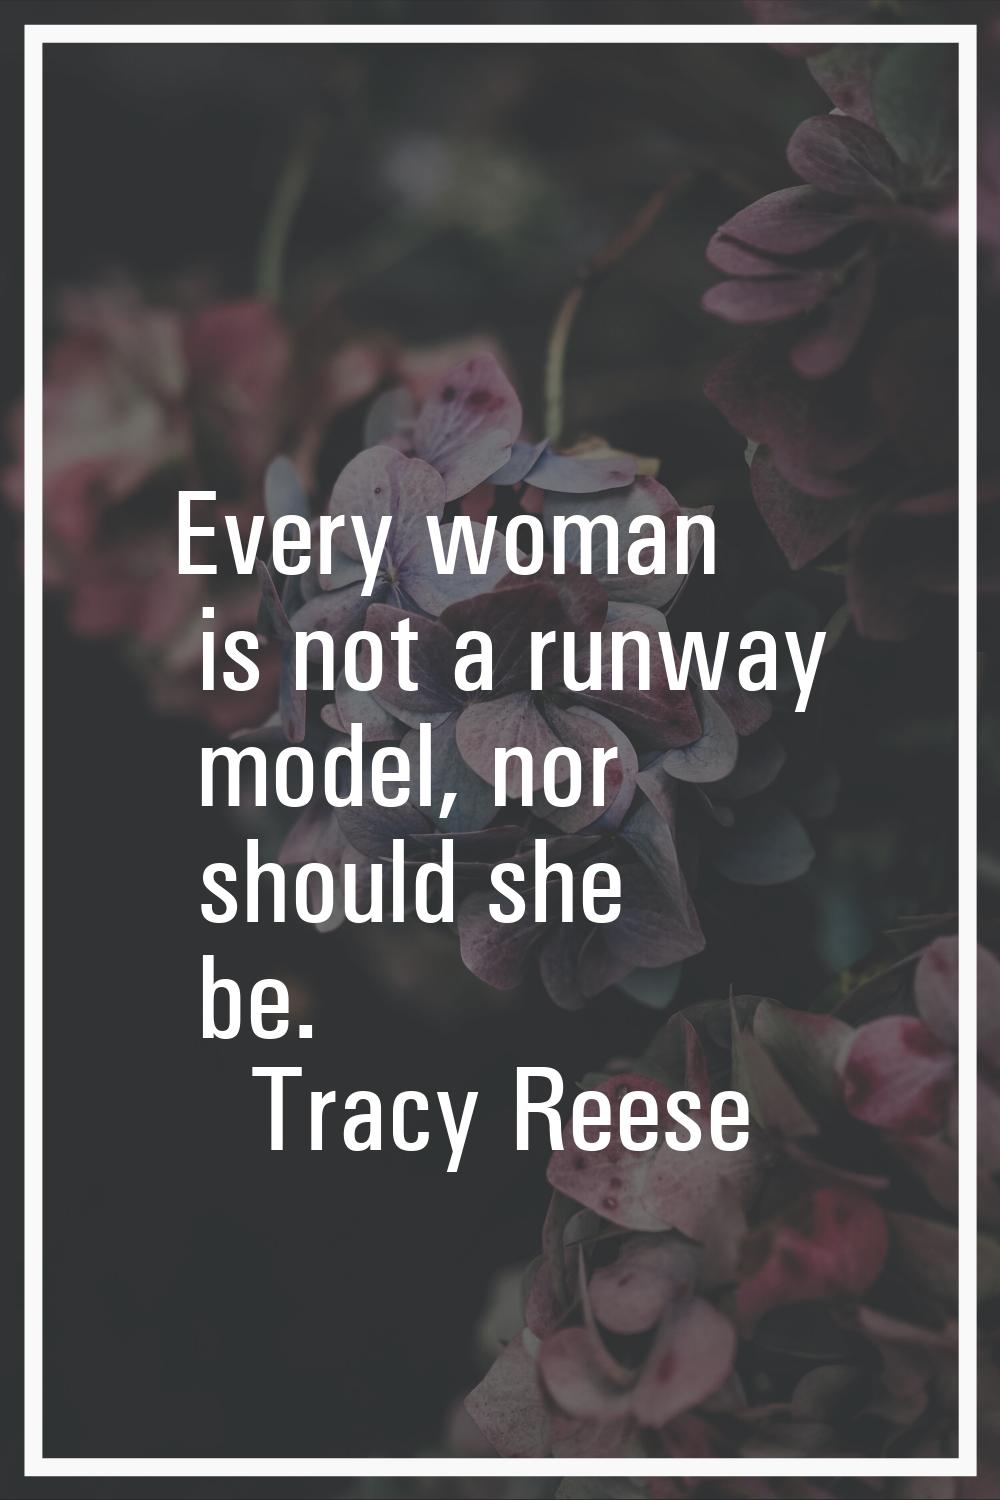 Every woman is not a runway model, nor should she be.